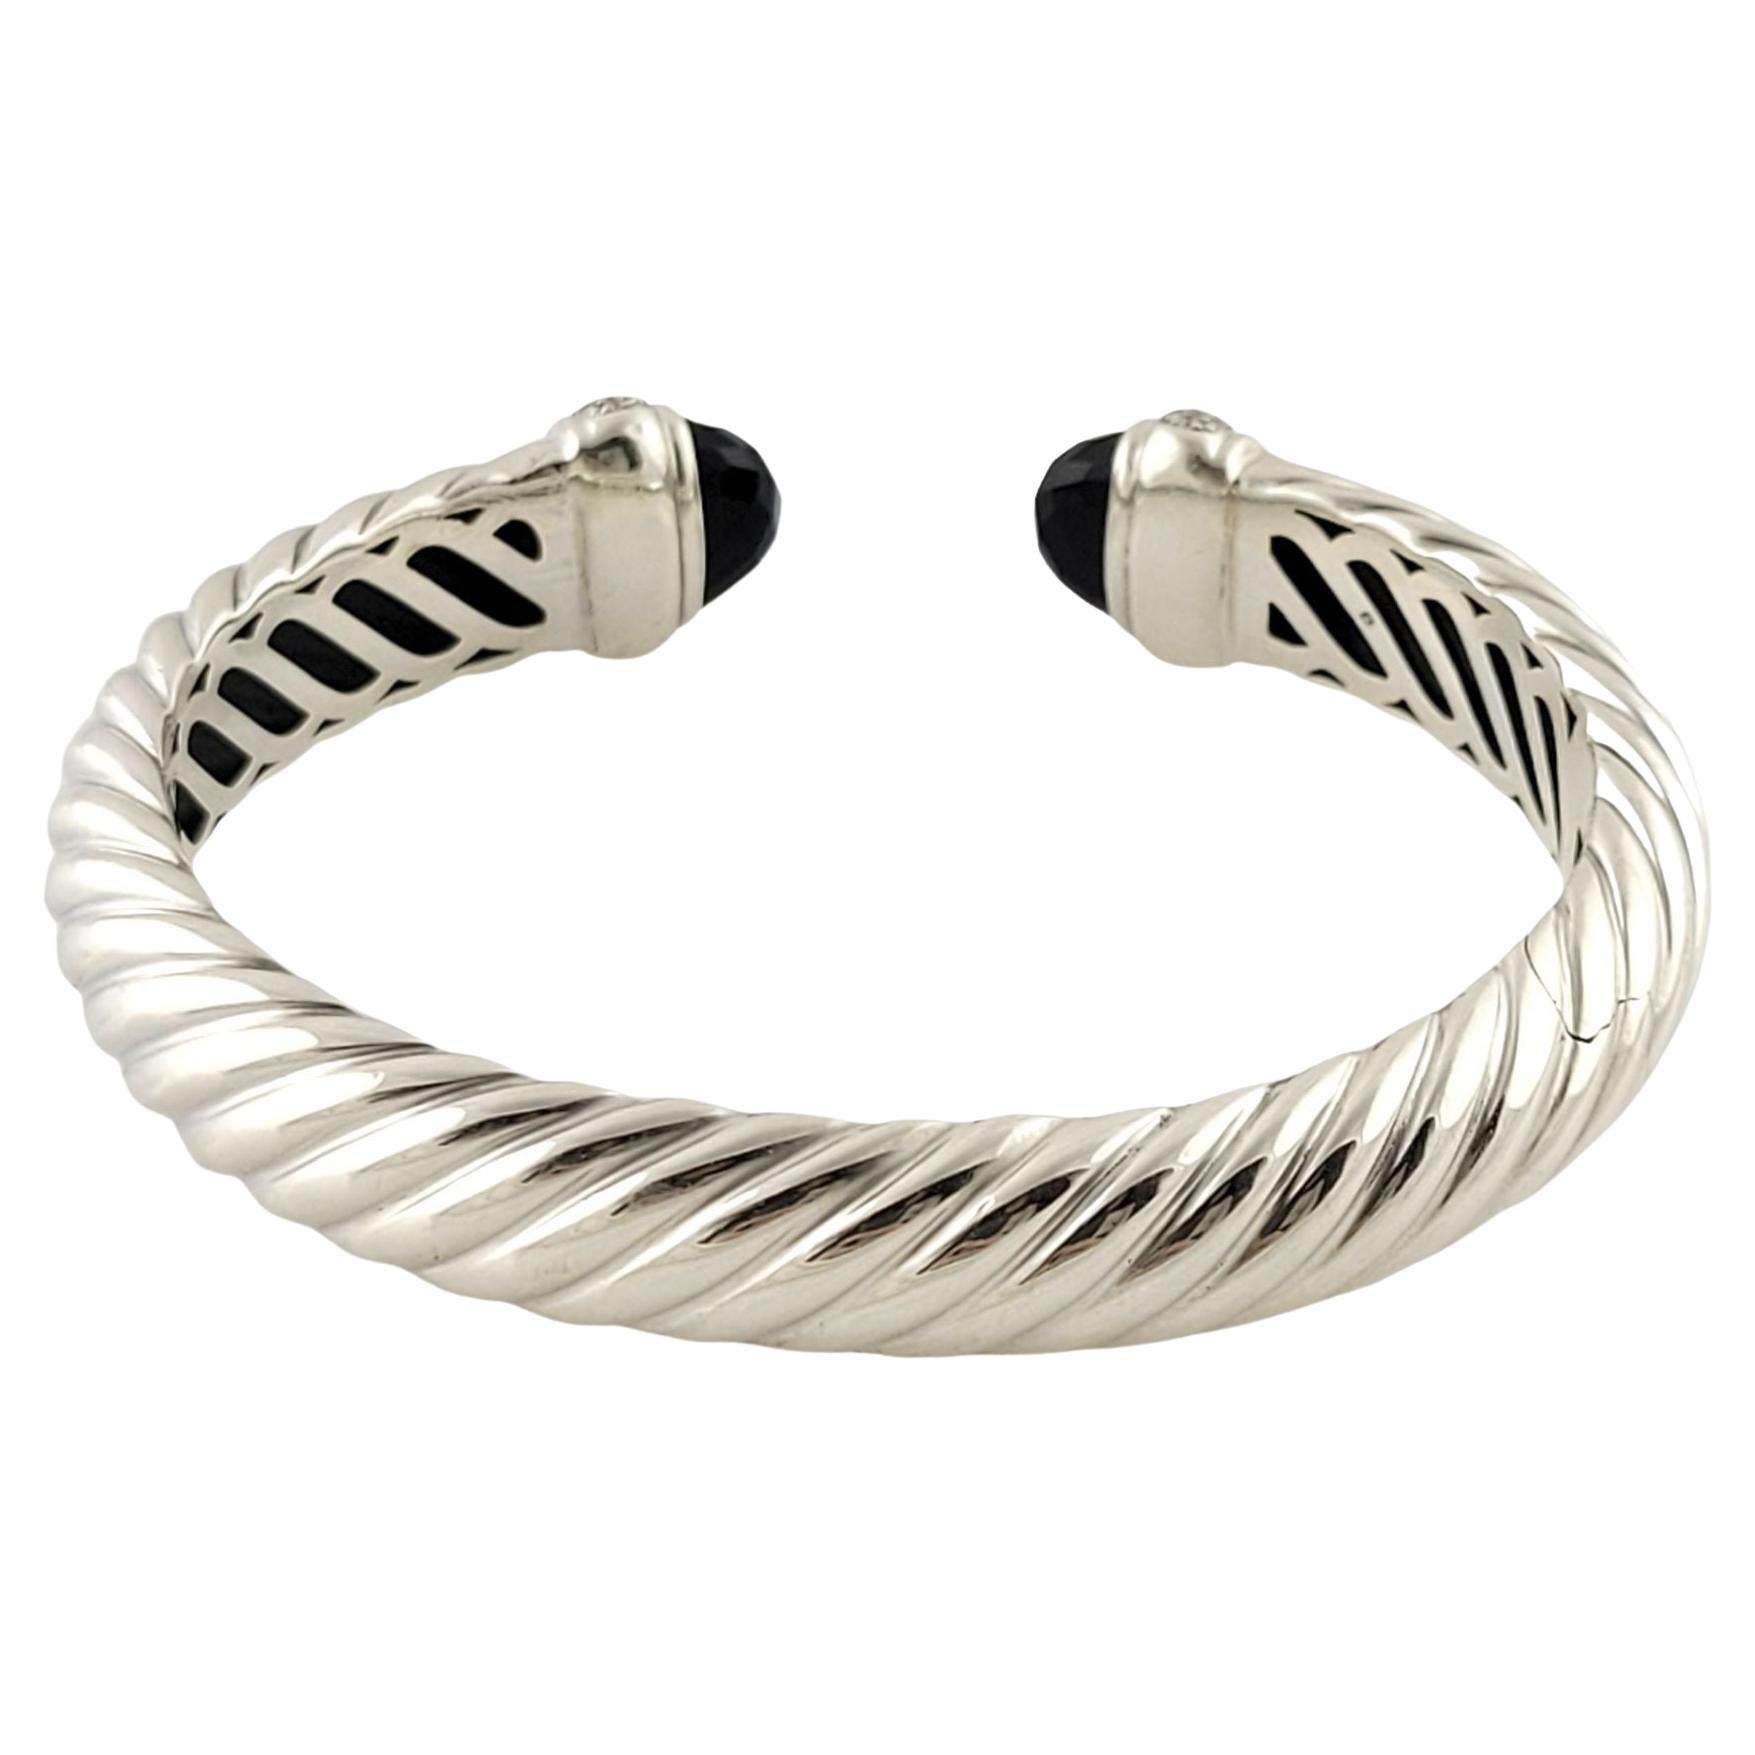 David Yurman Sterling Silver Black Onyx and Diamond Waverly Cuff Bracelet-

This elegant cuff bracelet by David Yurman is crafted in beautifully detailed sterling silver and features two faceted onyx gemstones accented with 80 round brilliant cut